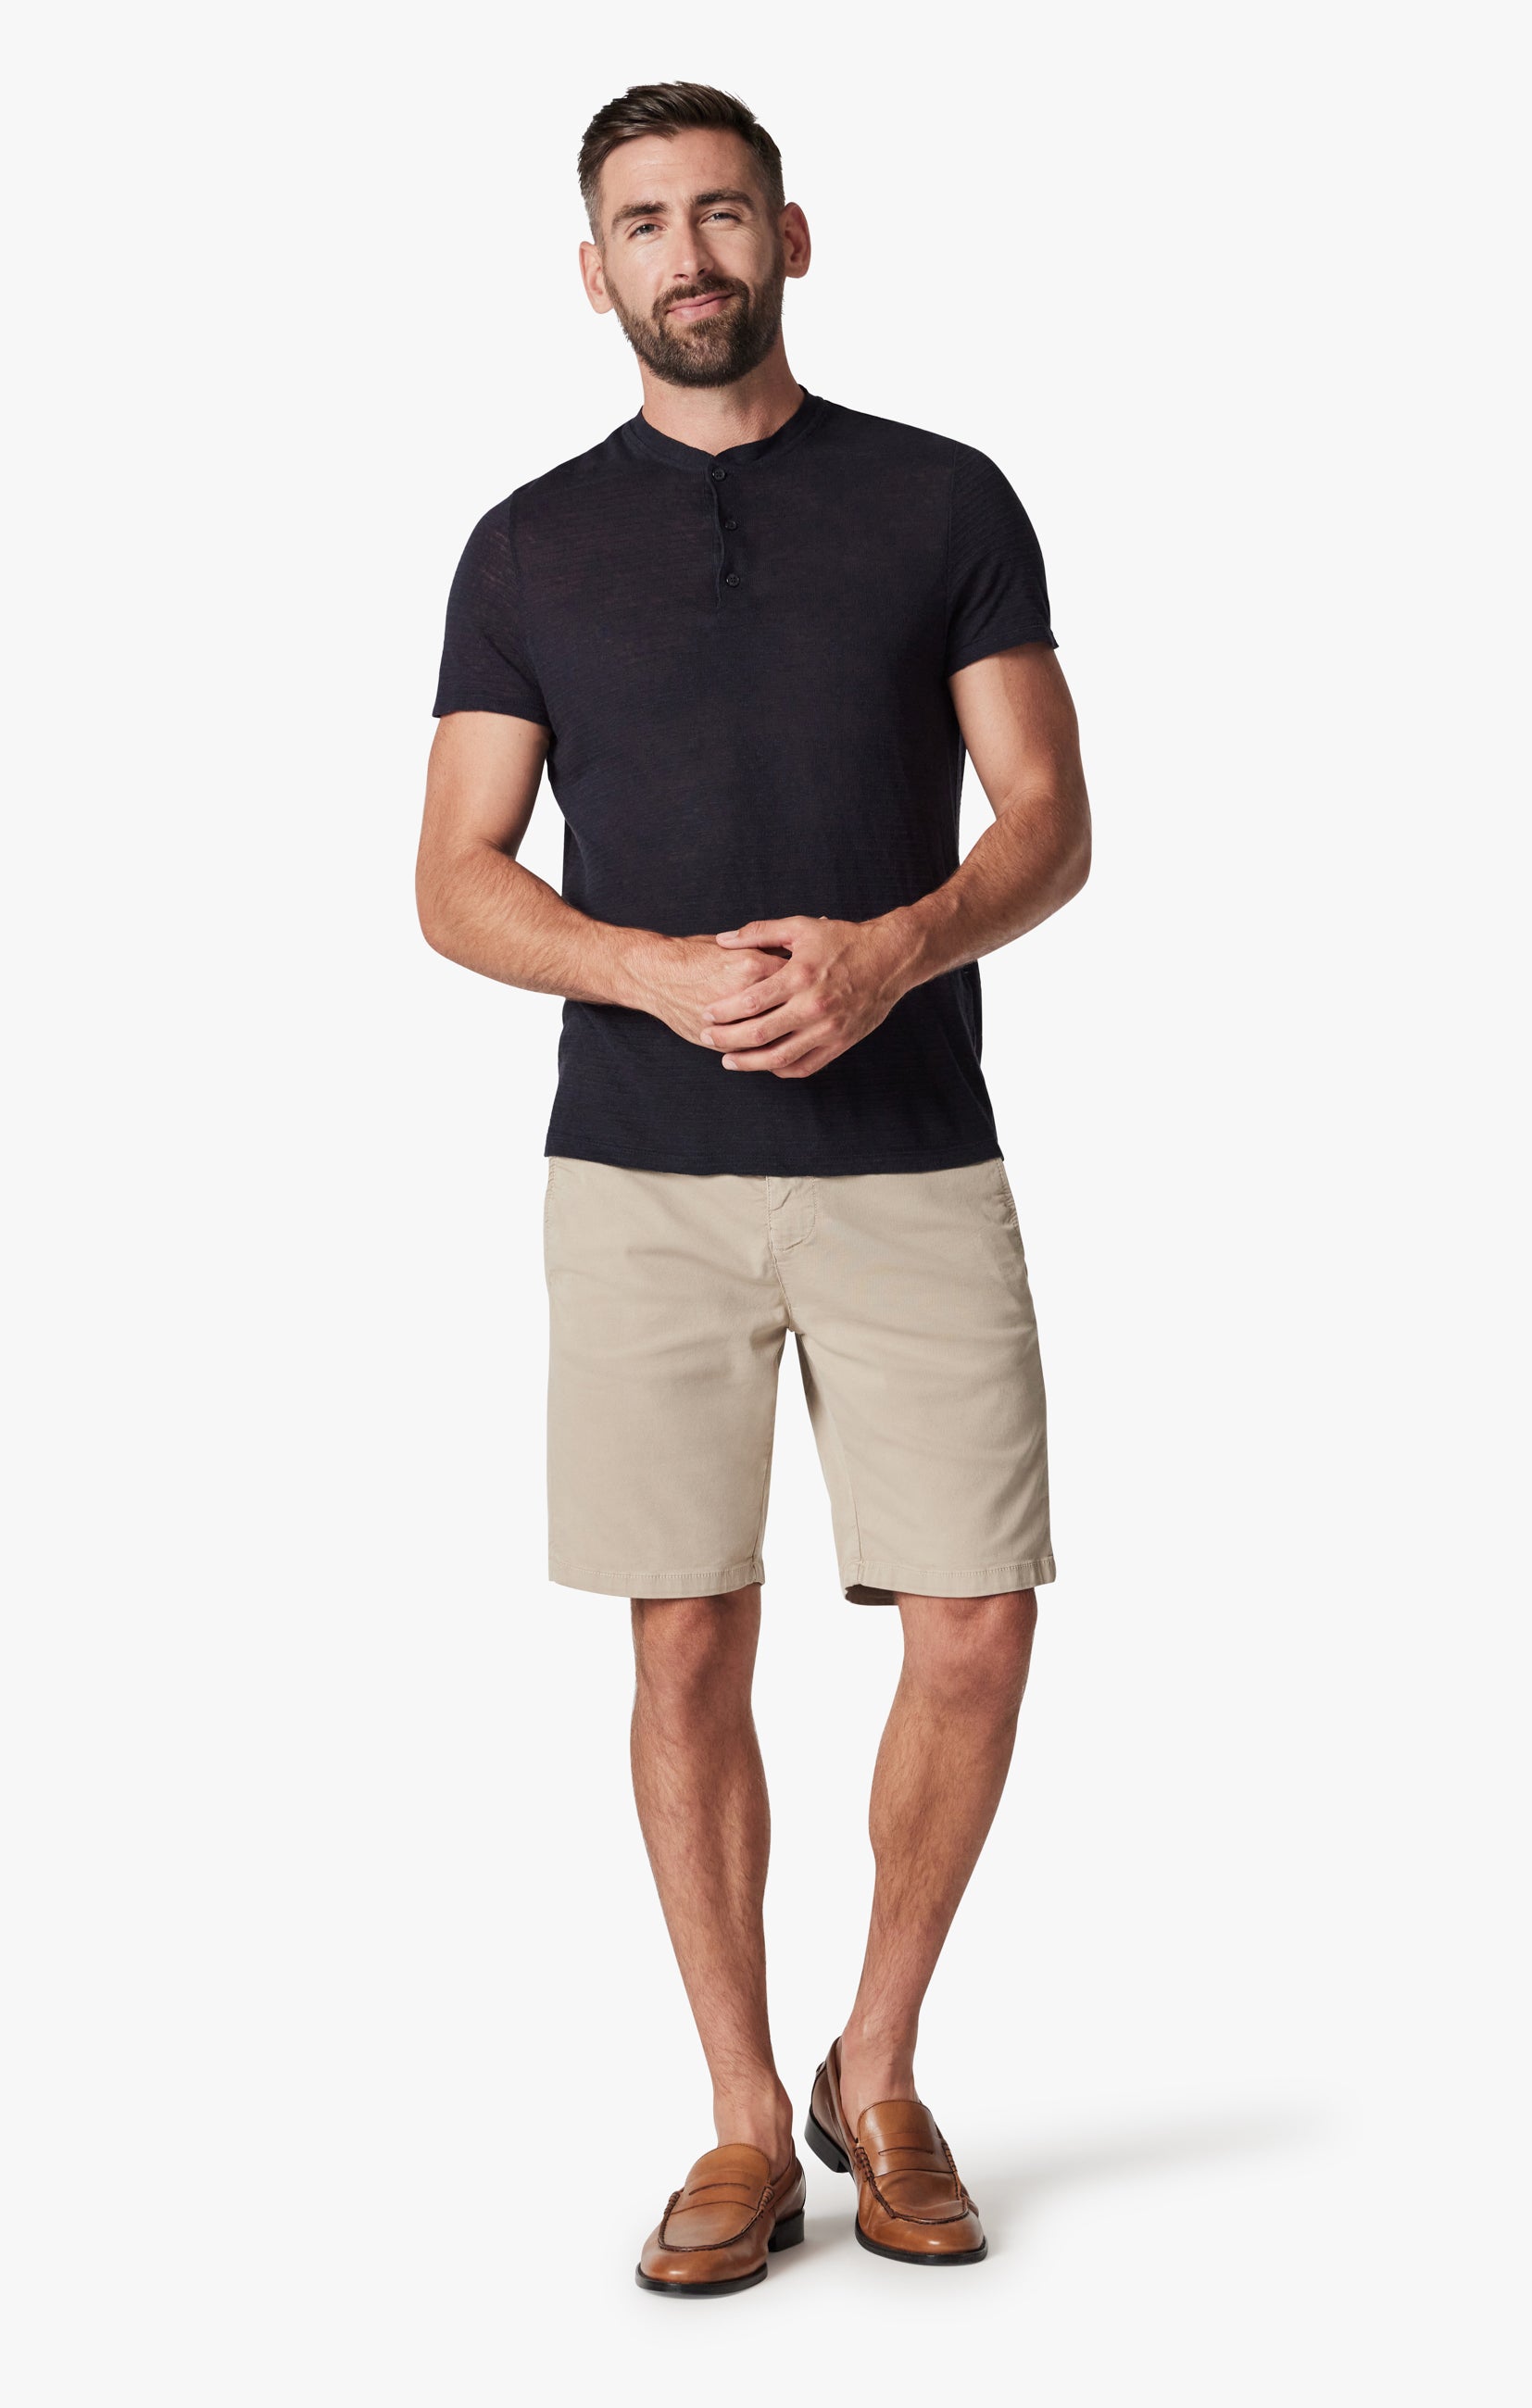 Nevada Shorts In Laurel Oak Soft Touch Image 1